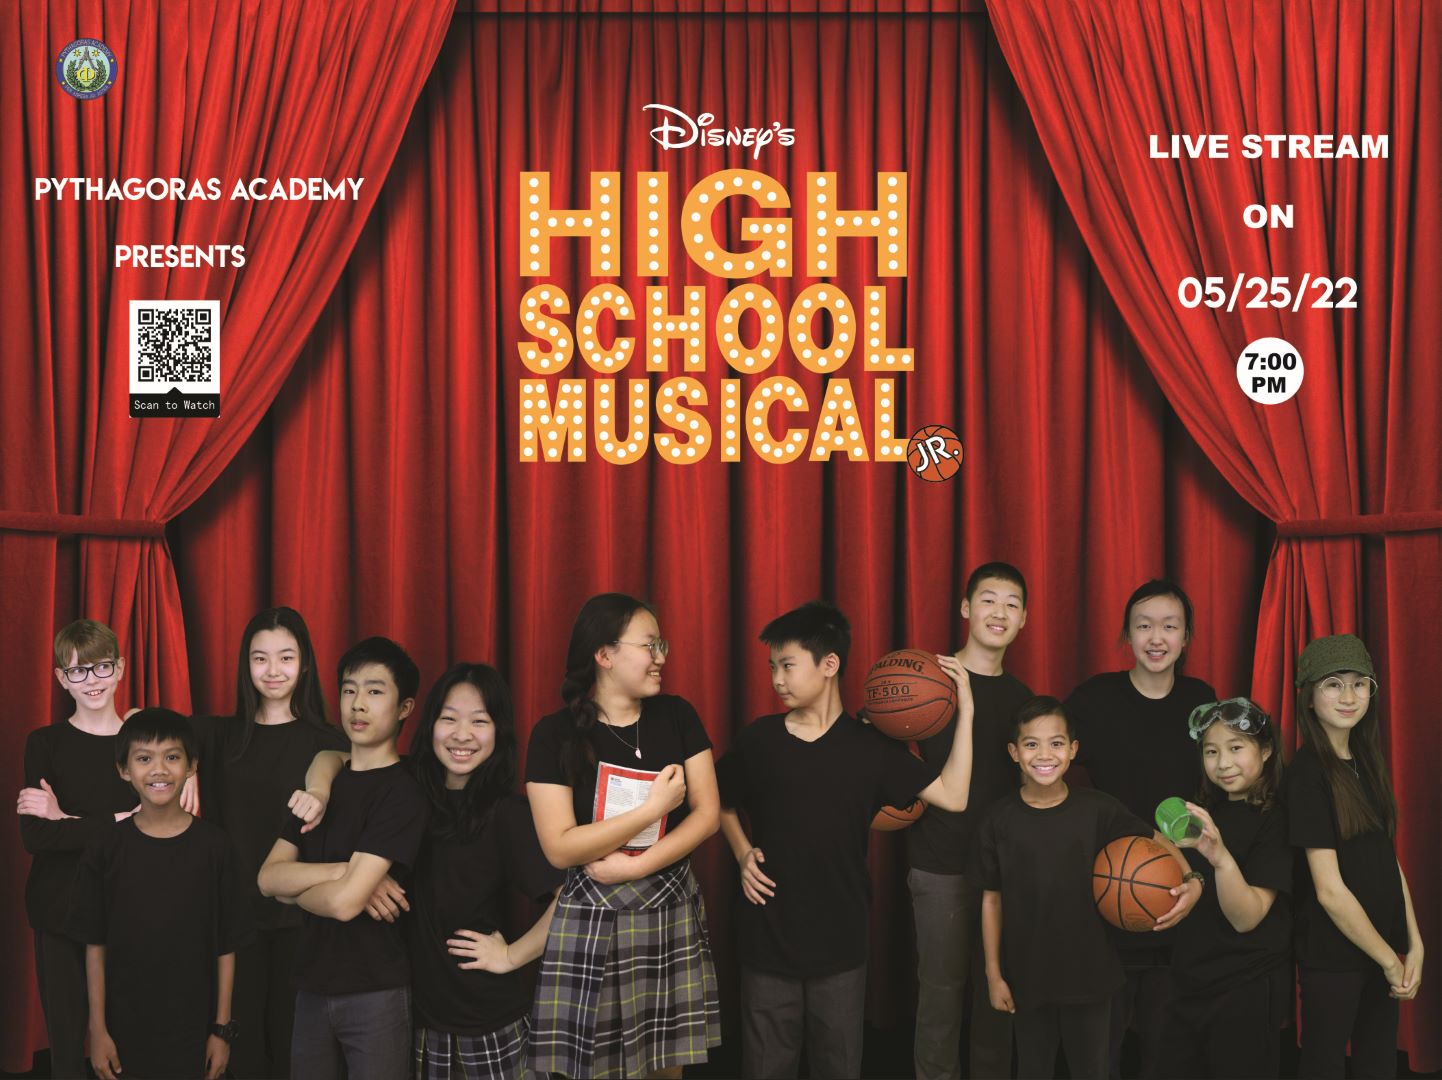 High School Musical will premiere on May 25 at 7 pm